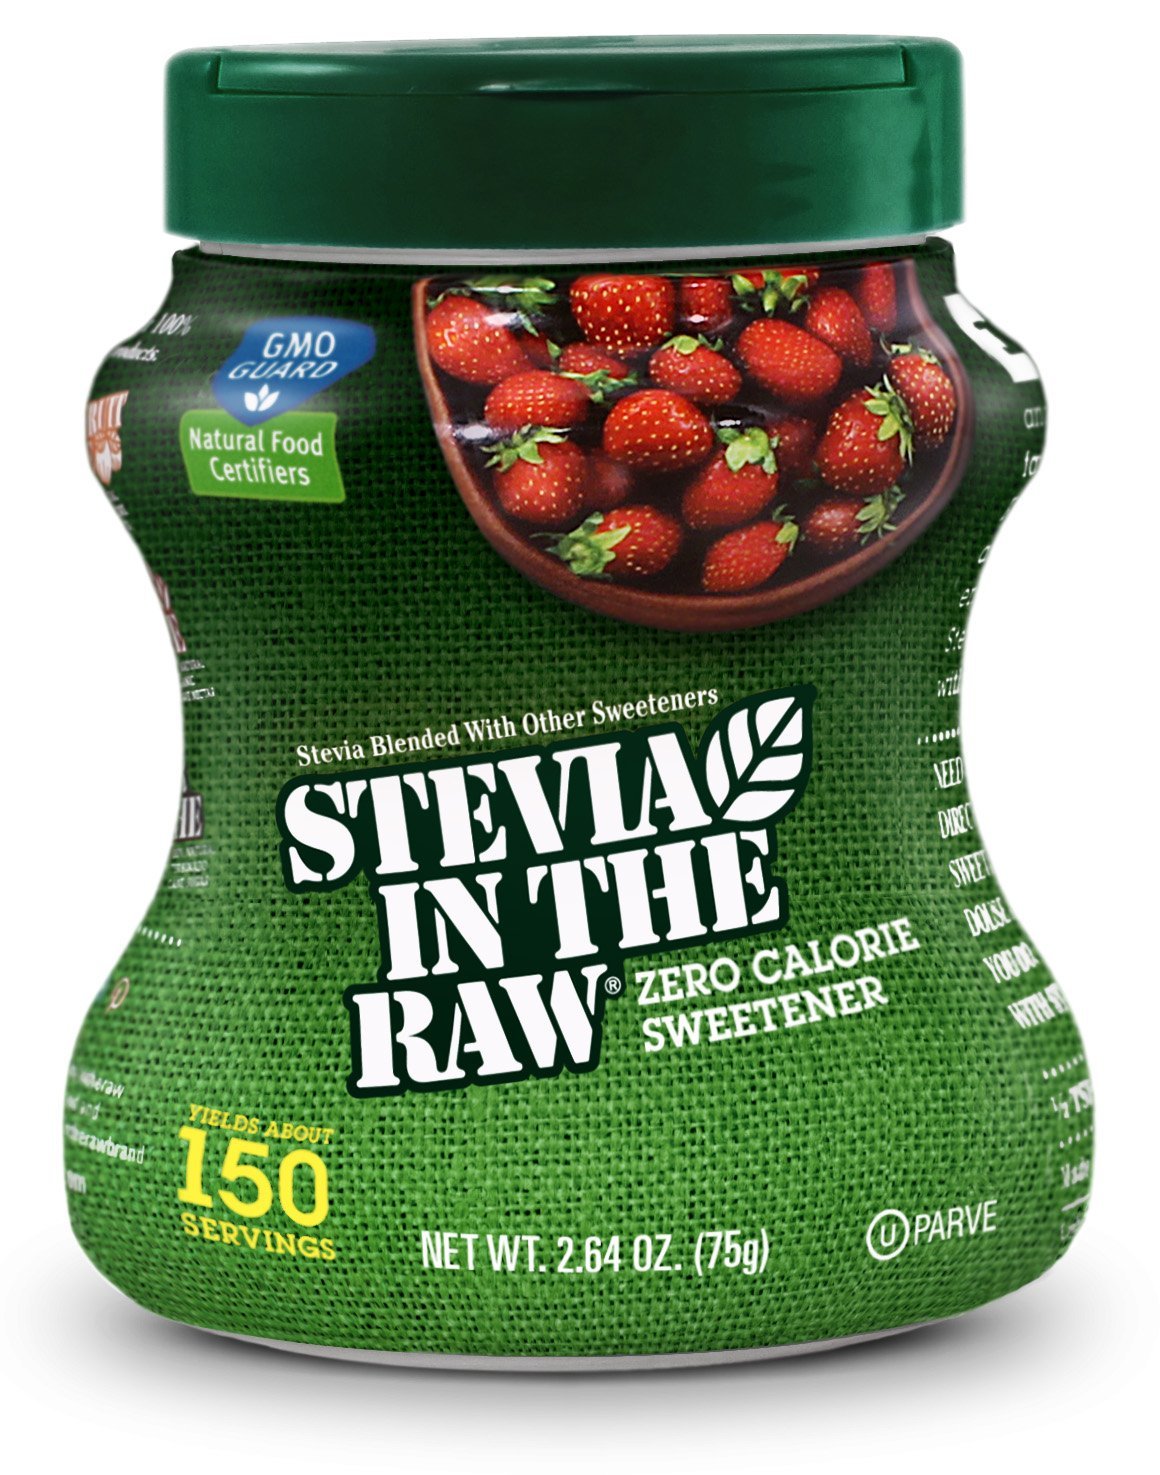 Amazon.com : Stevia in the Raw 9.7oz (Pack of 2) : Raw ...